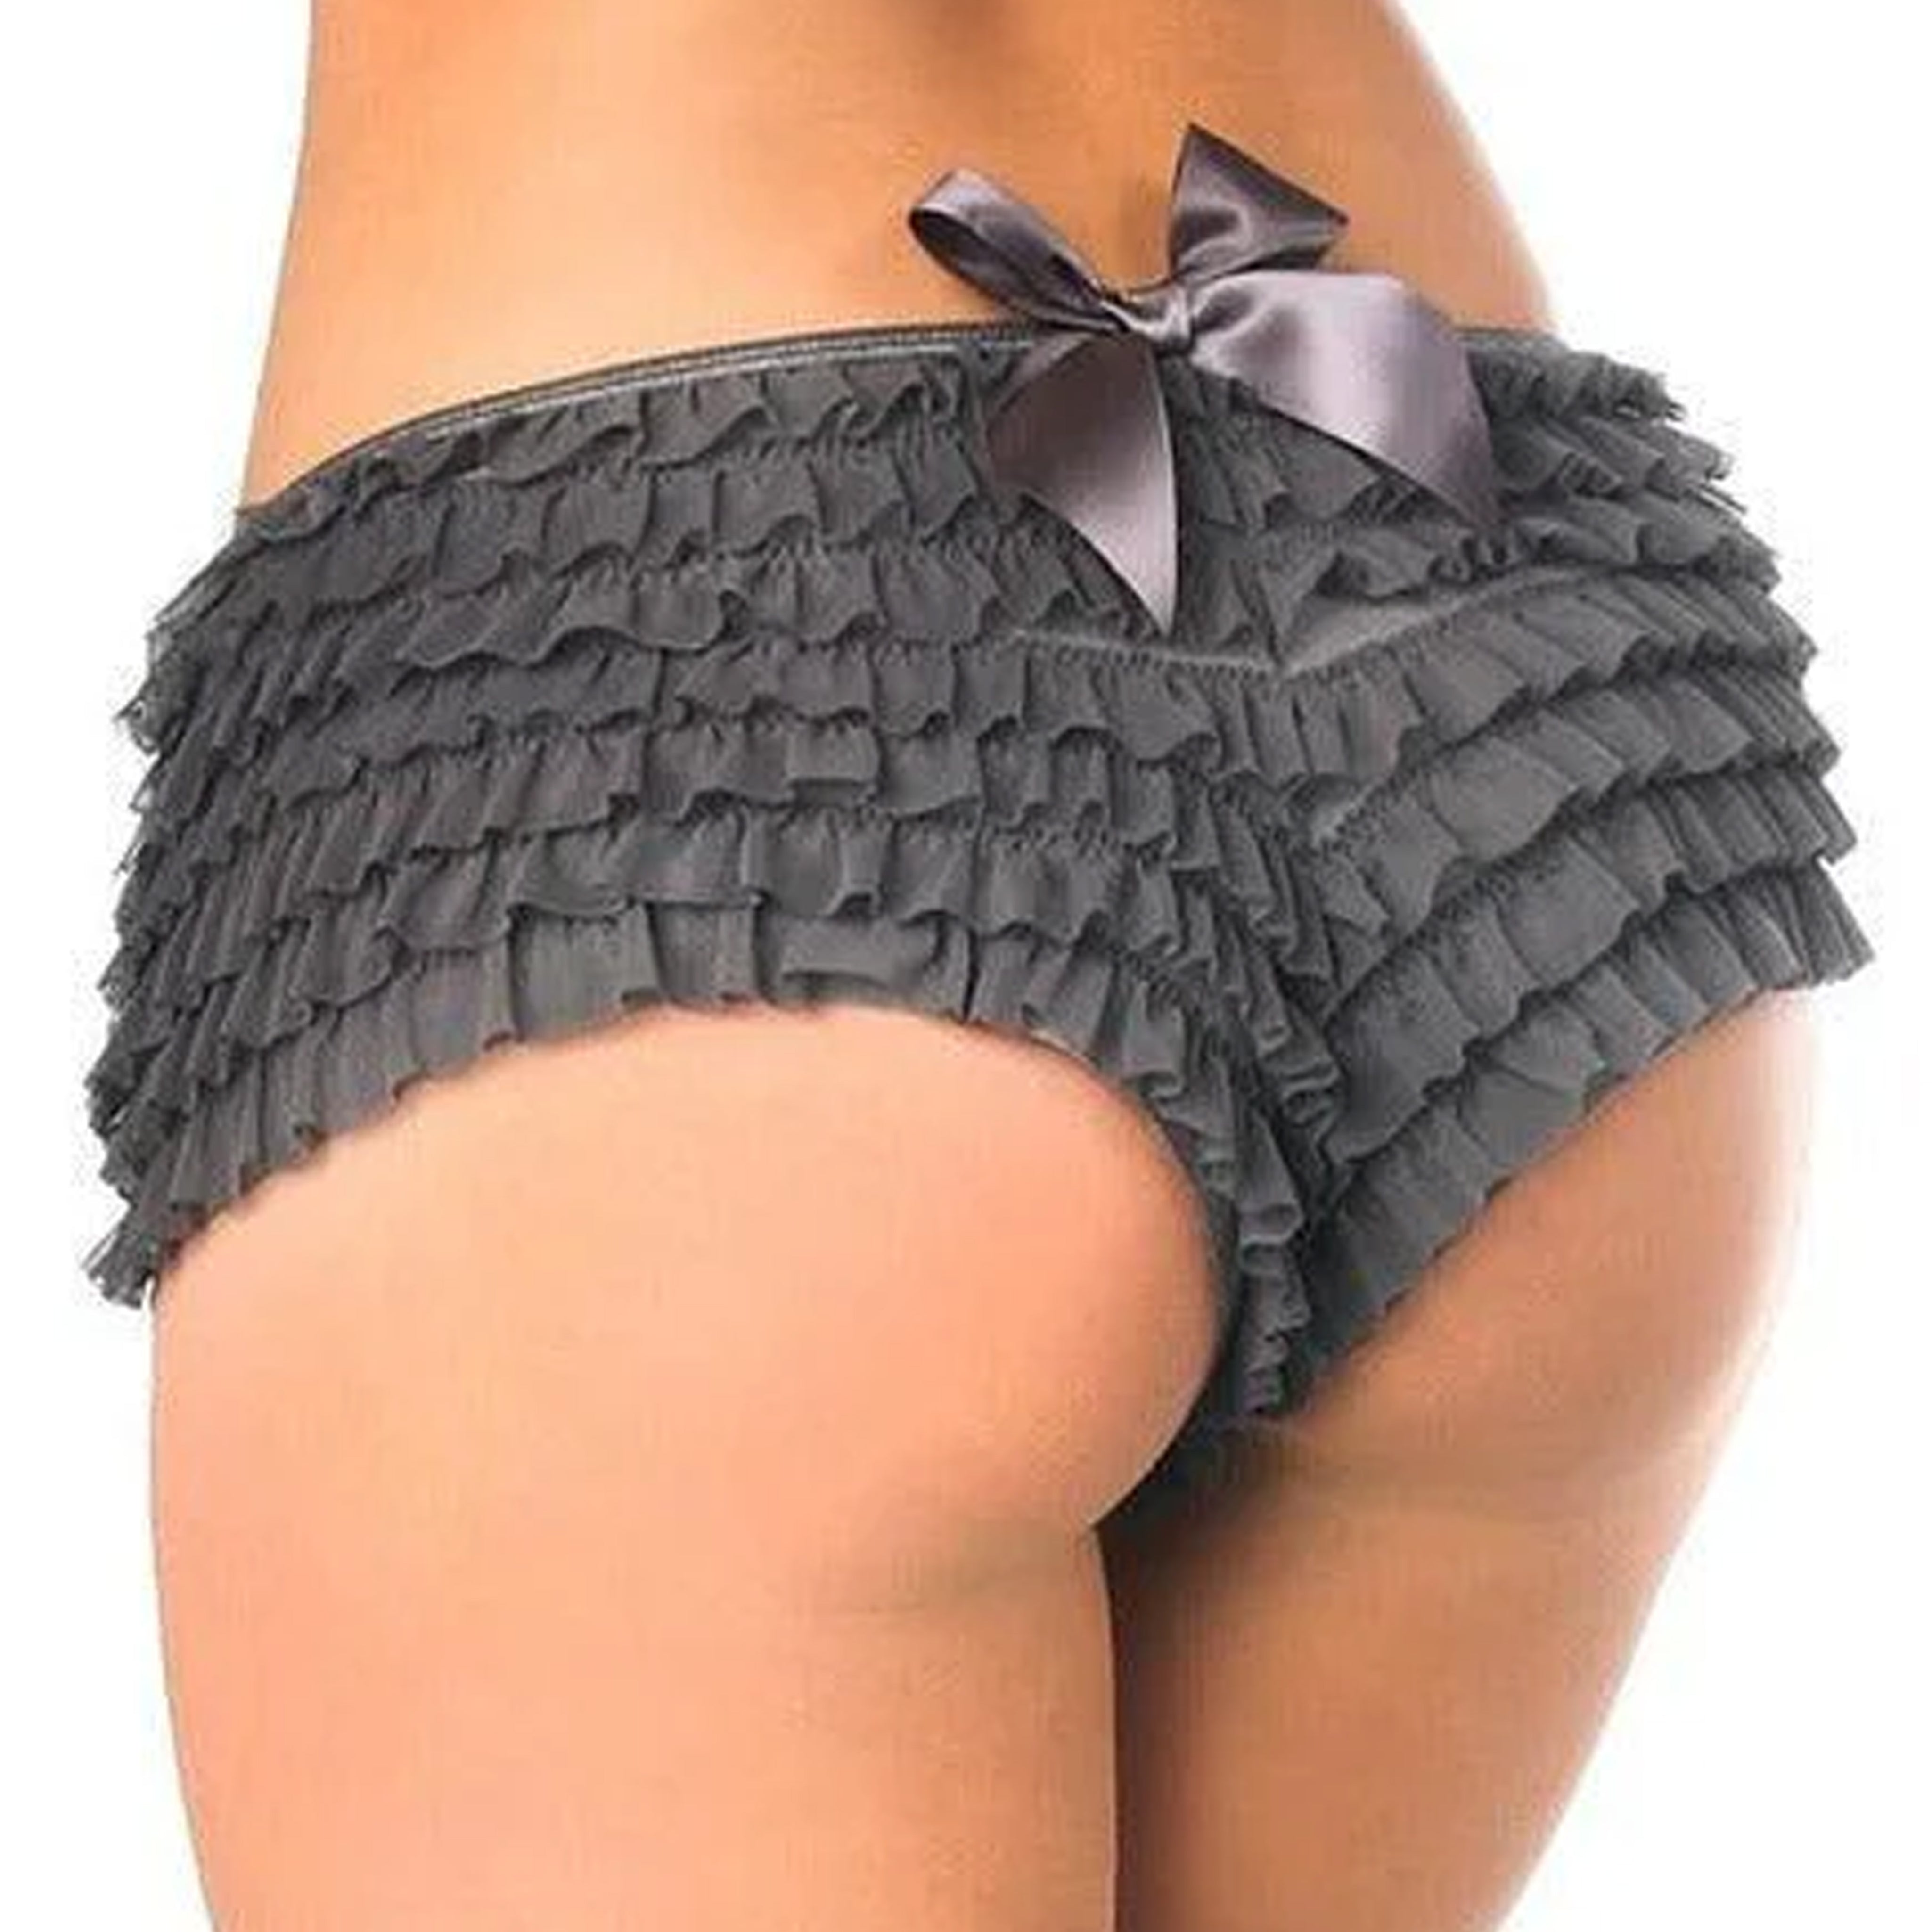 Ruffle Cheeky Shorts With Bow